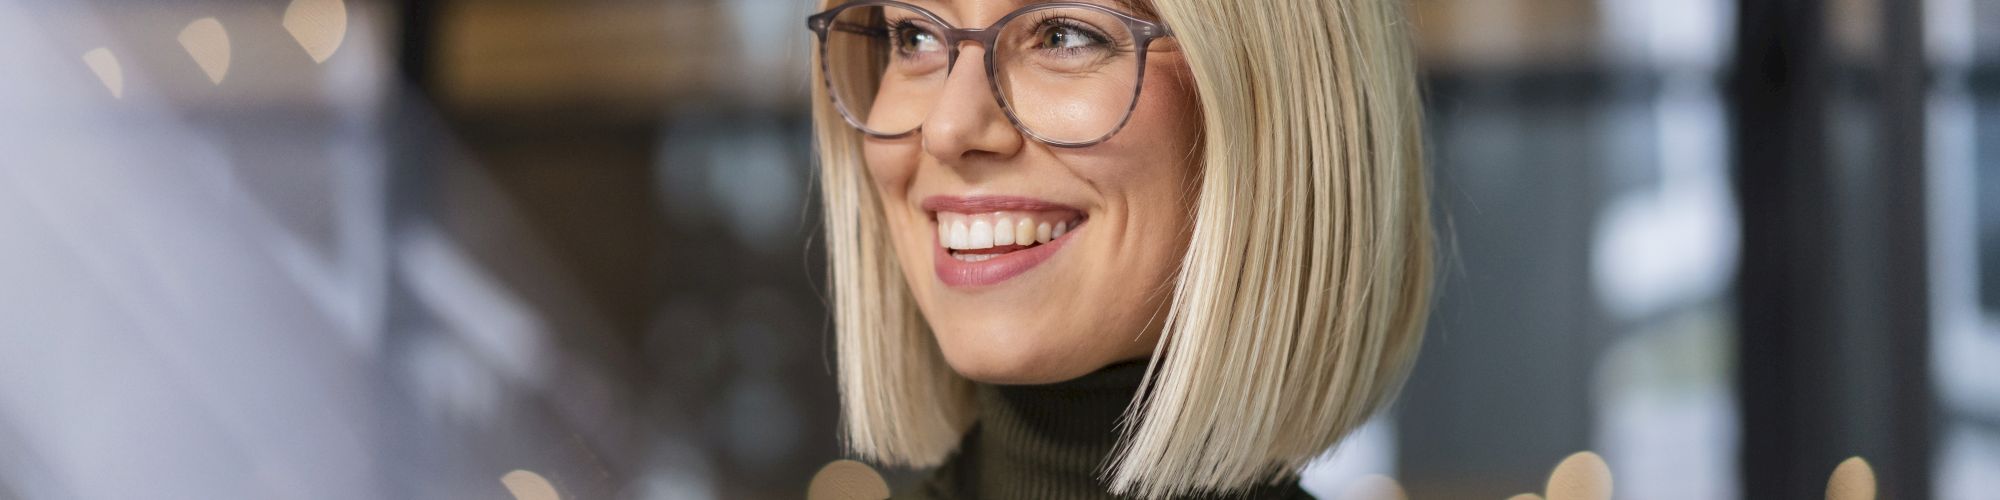 A person with blonde hair and glasses is smiling, wearing a dark green turtleneck sweater. The background is blurry with round lights and window reflections.